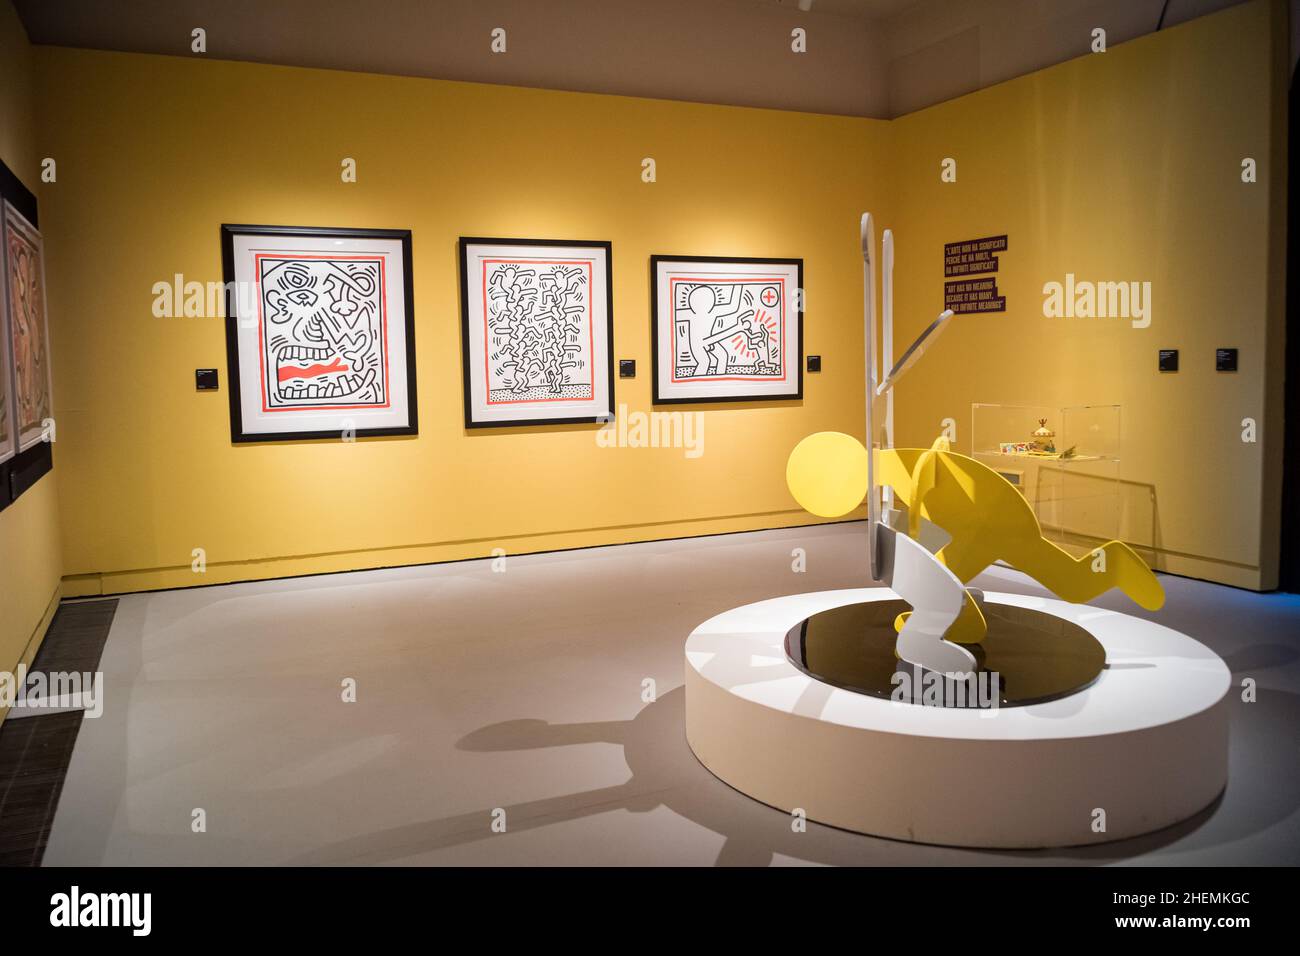 pictures of the exhibition about the Keith Haring art held in Pisa, Italy Stock Photo